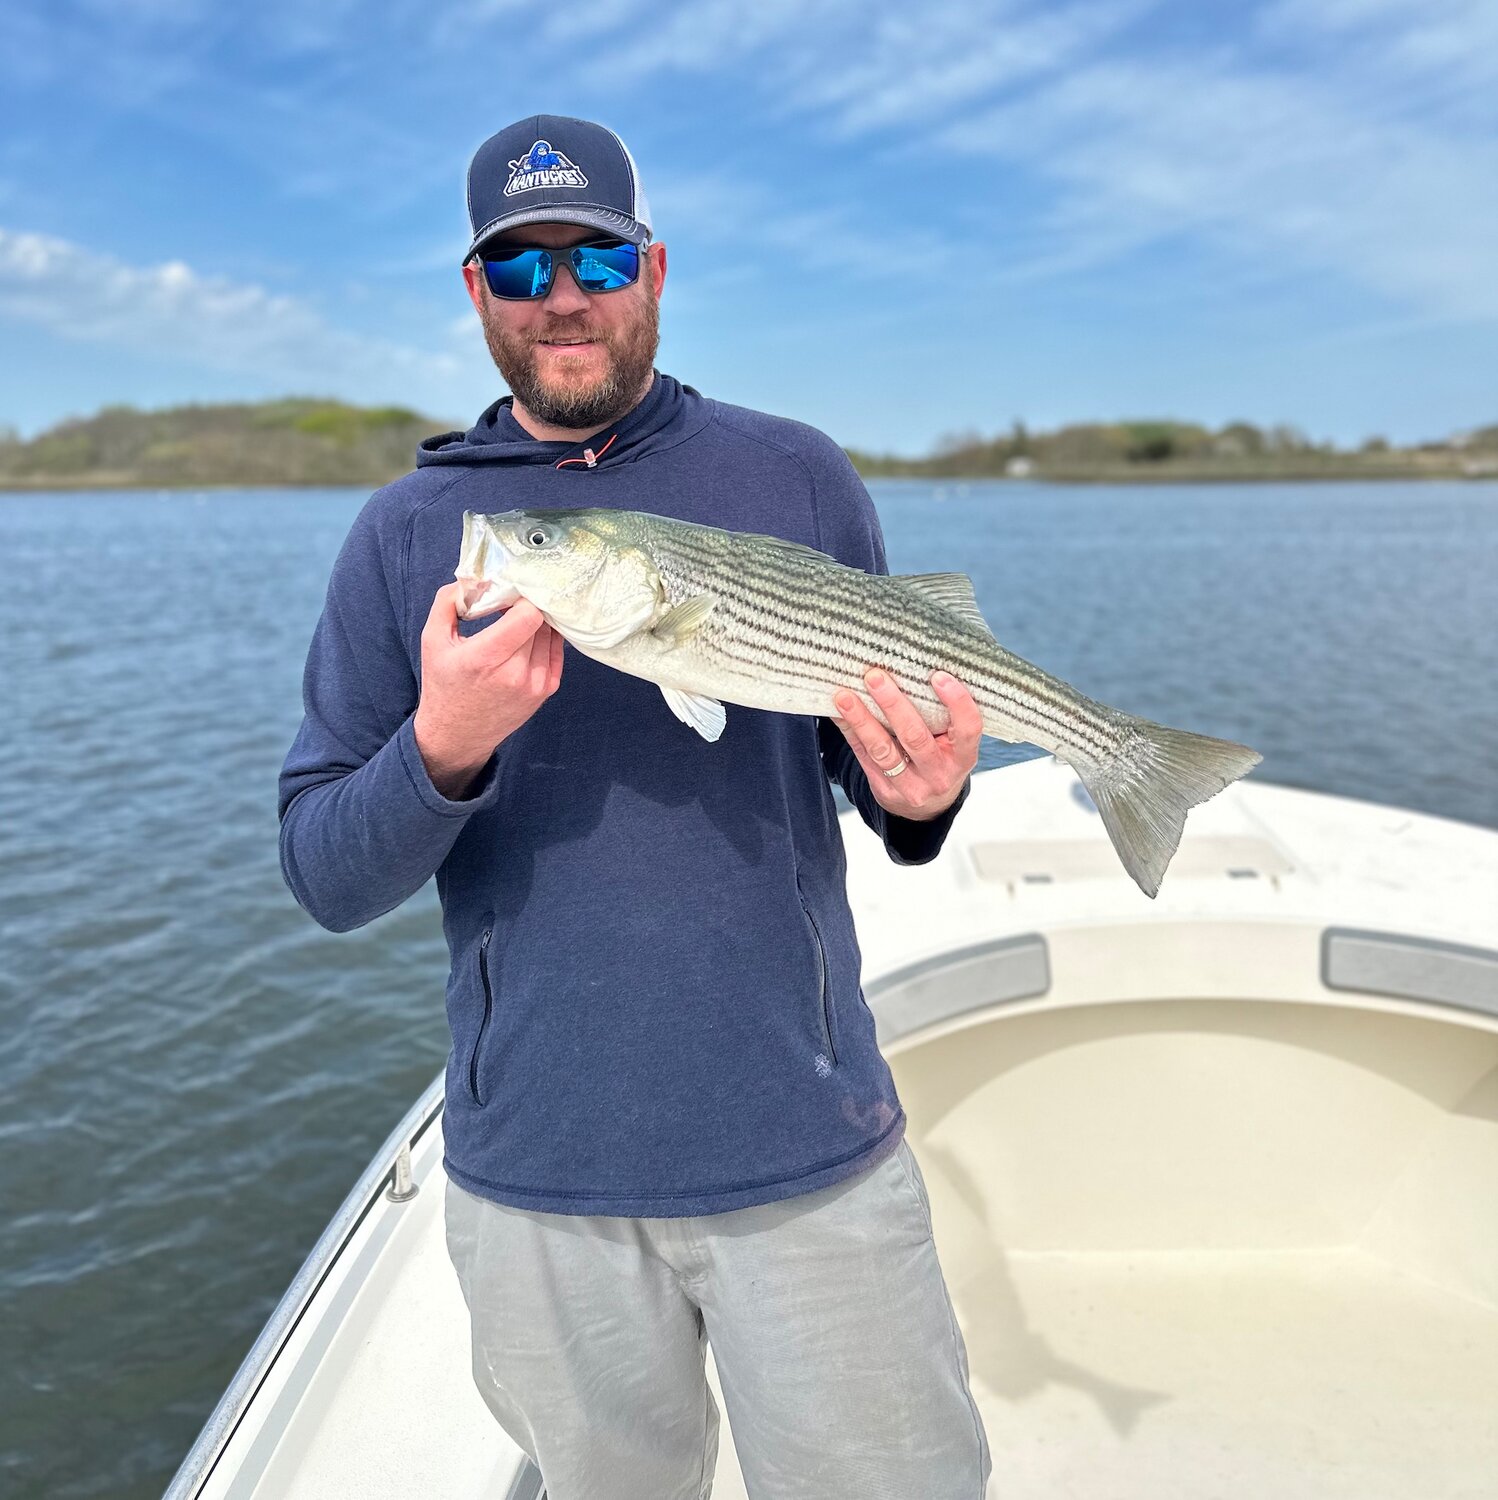 Chris Cothran with a striped bass in Nantucket Harbor.